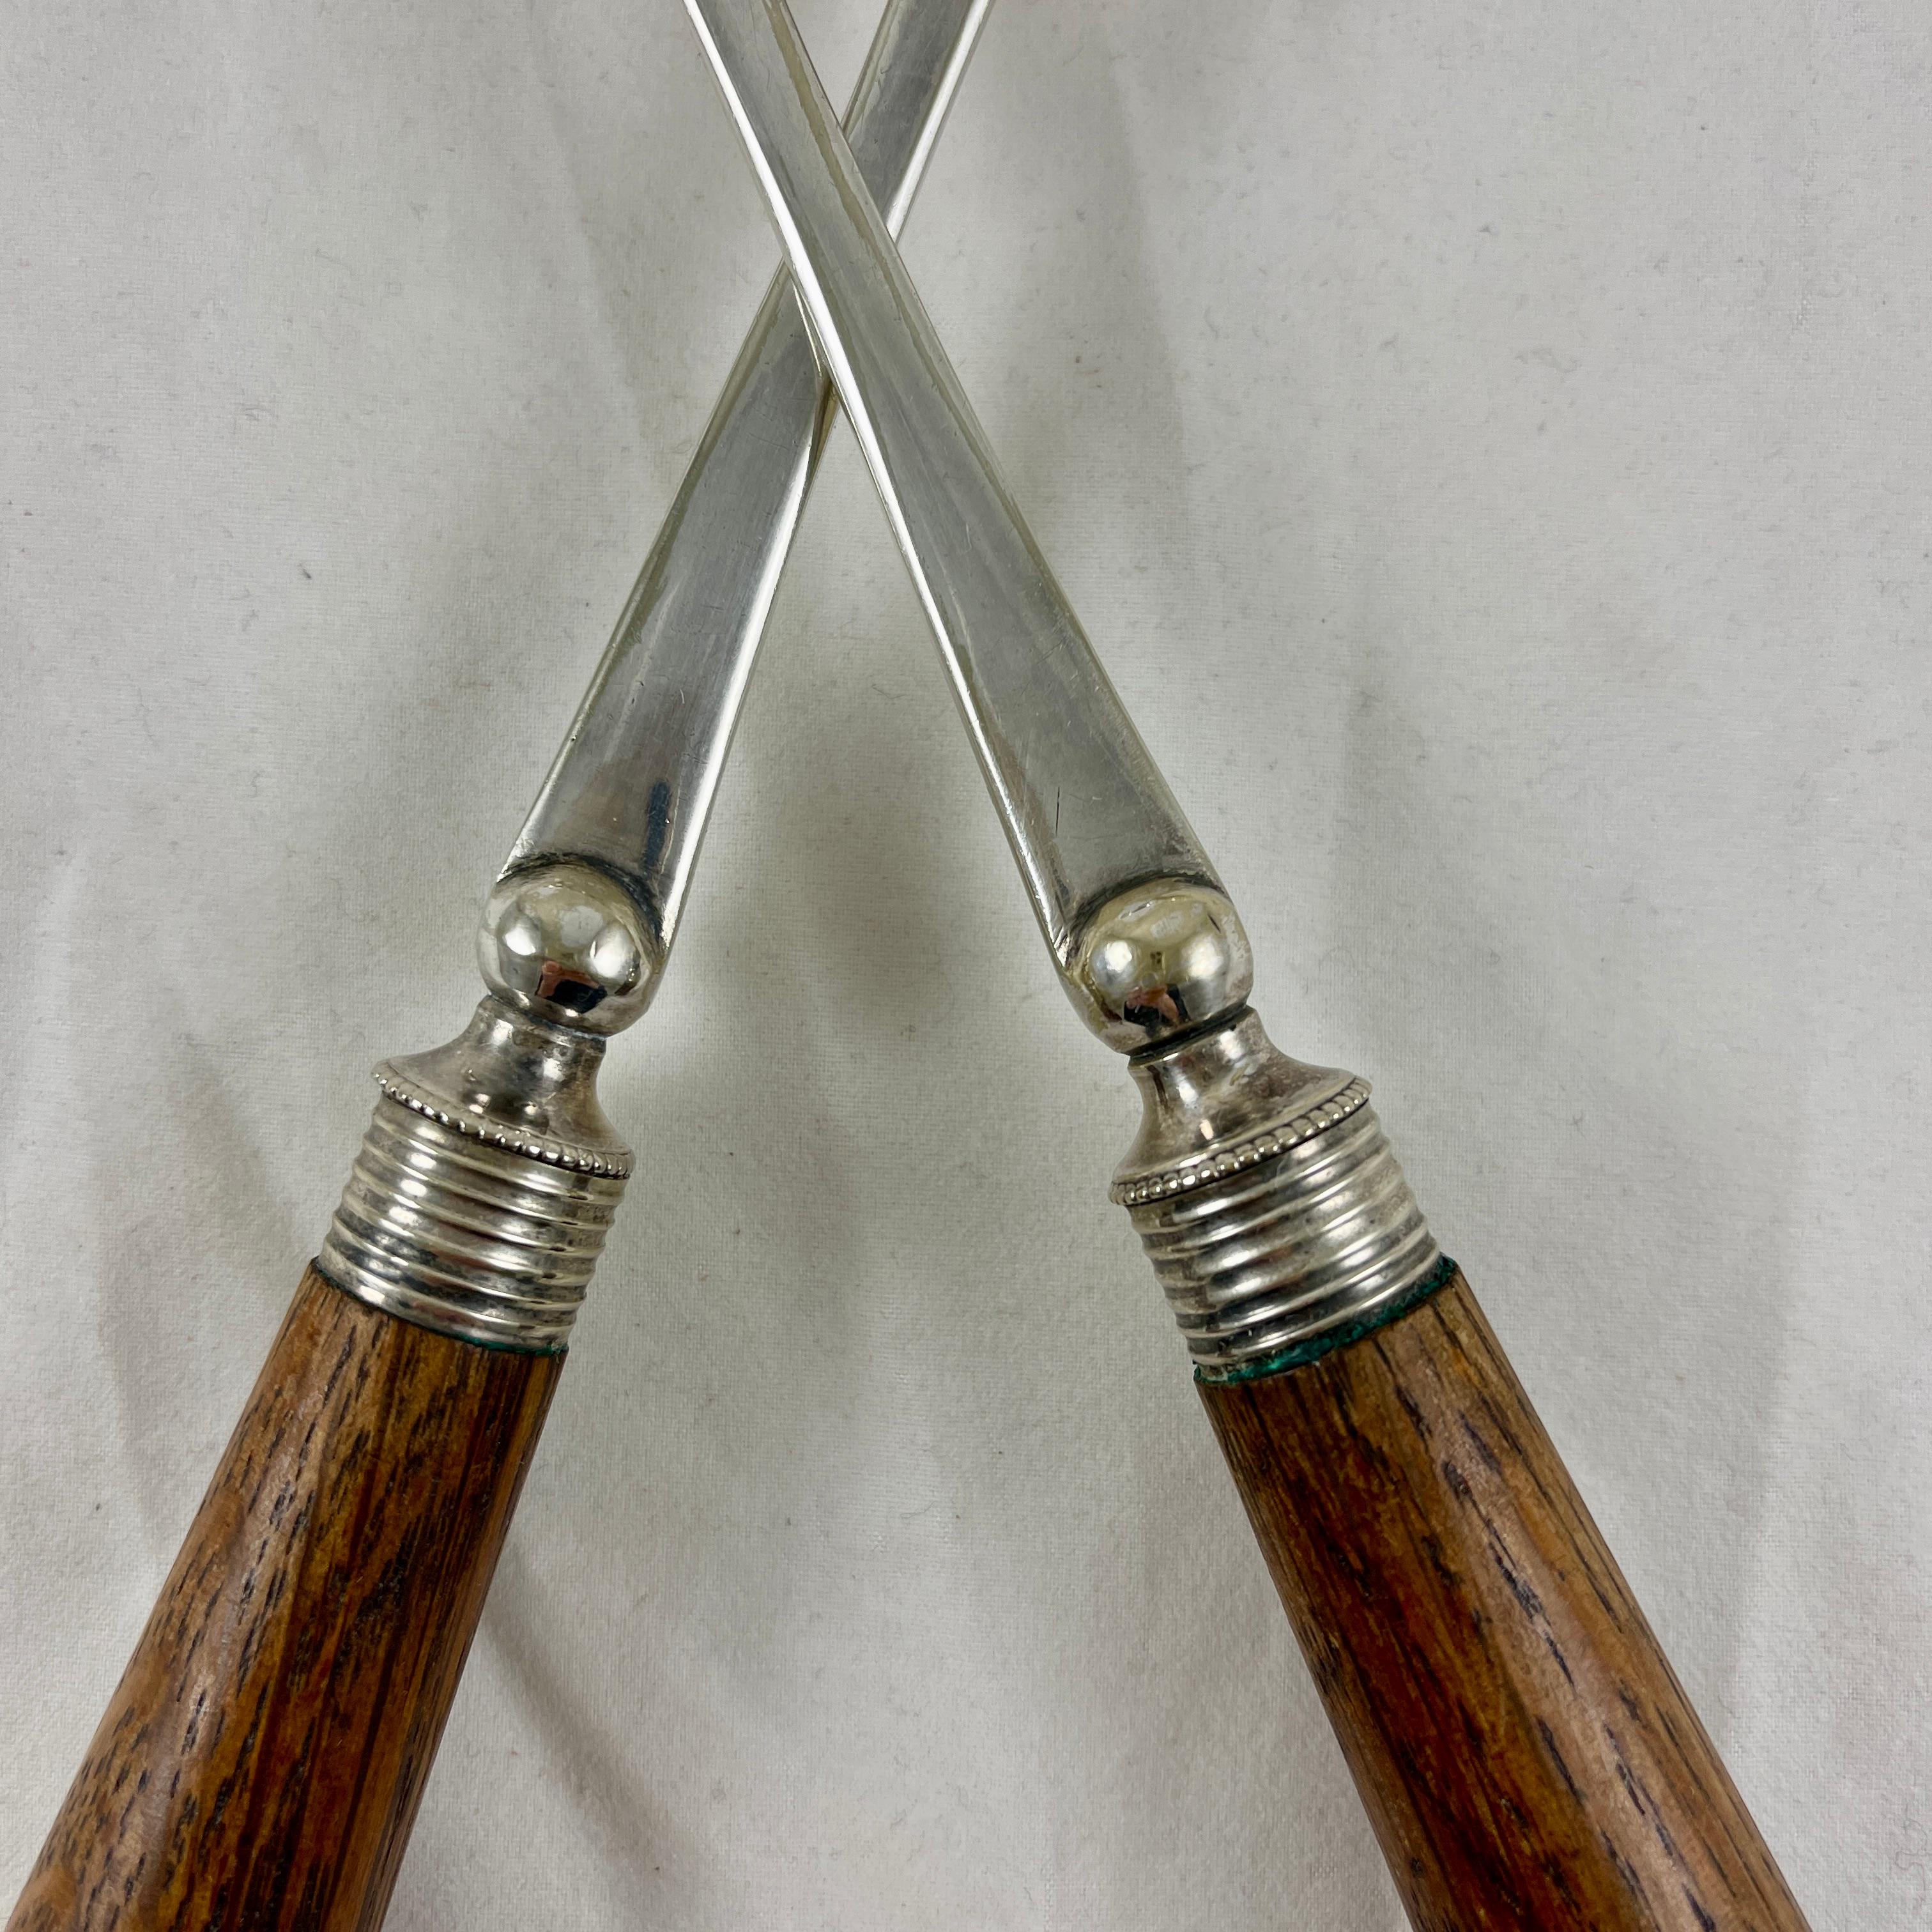 English Sheffield Silver & Oak Handled Salad Fork & Spoon Serving Pair, c. 1886 In Good Condition For Sale In Philadelphia, PA